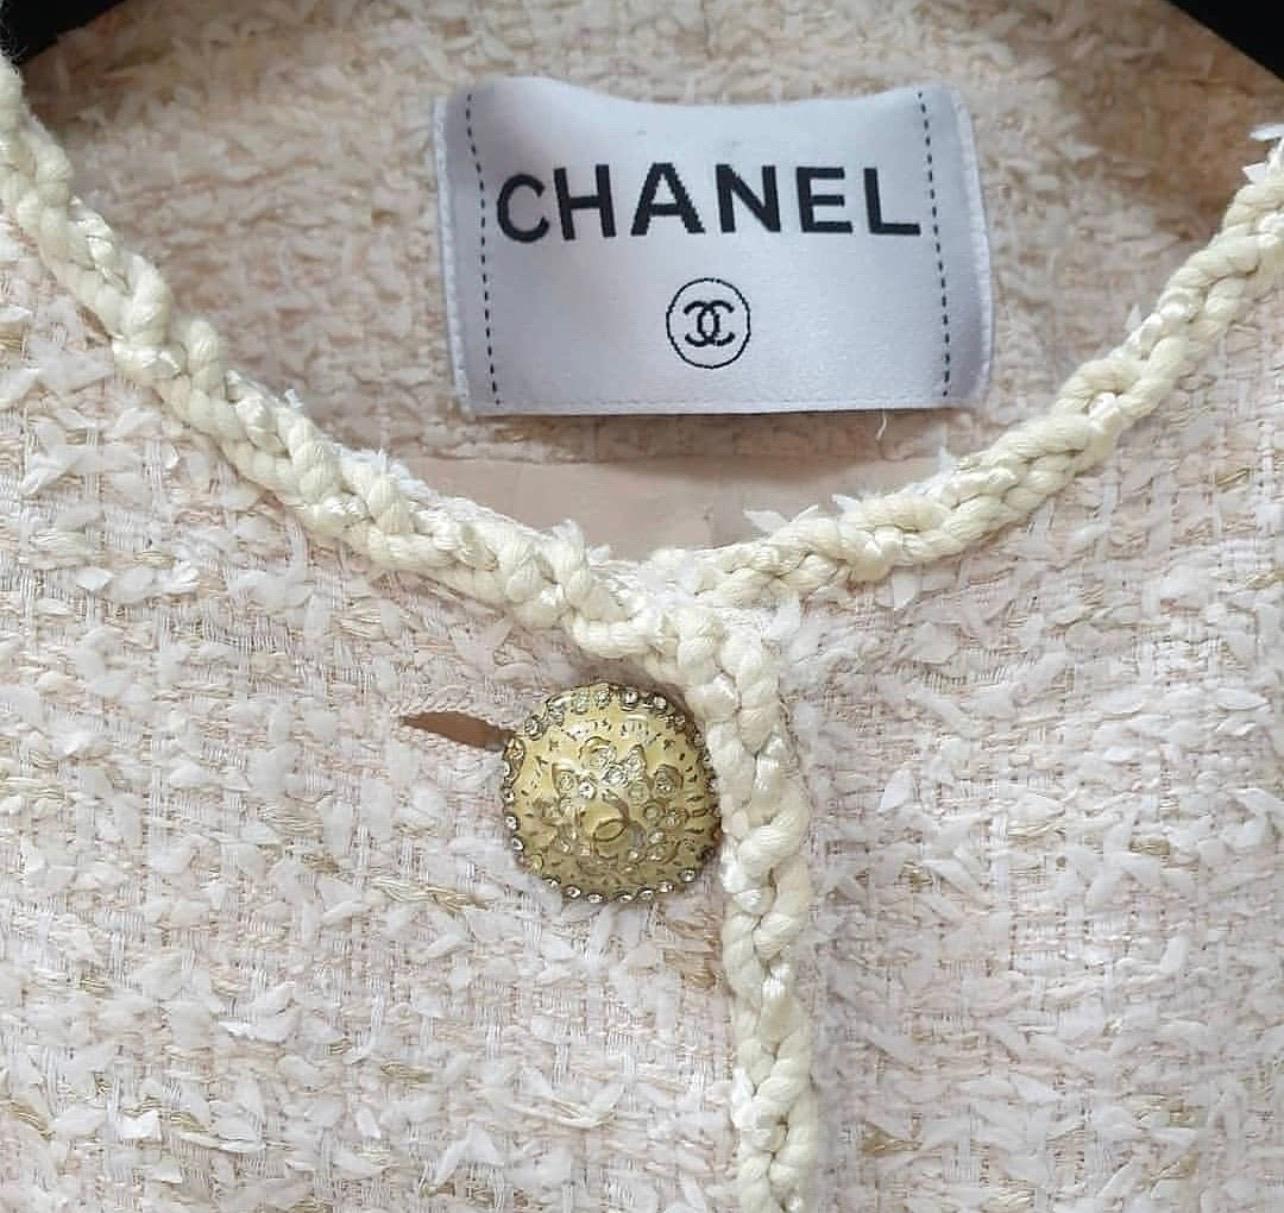 Chanel 2010 ready to wear.

No size tag.

Correspond to Sz.36.

Bust-46 cm

Length- 56 cm

Sleeve length-48 cm 

Very good condition.

For buyers from EU we can provide shipping from Poland. Please demand if you need.